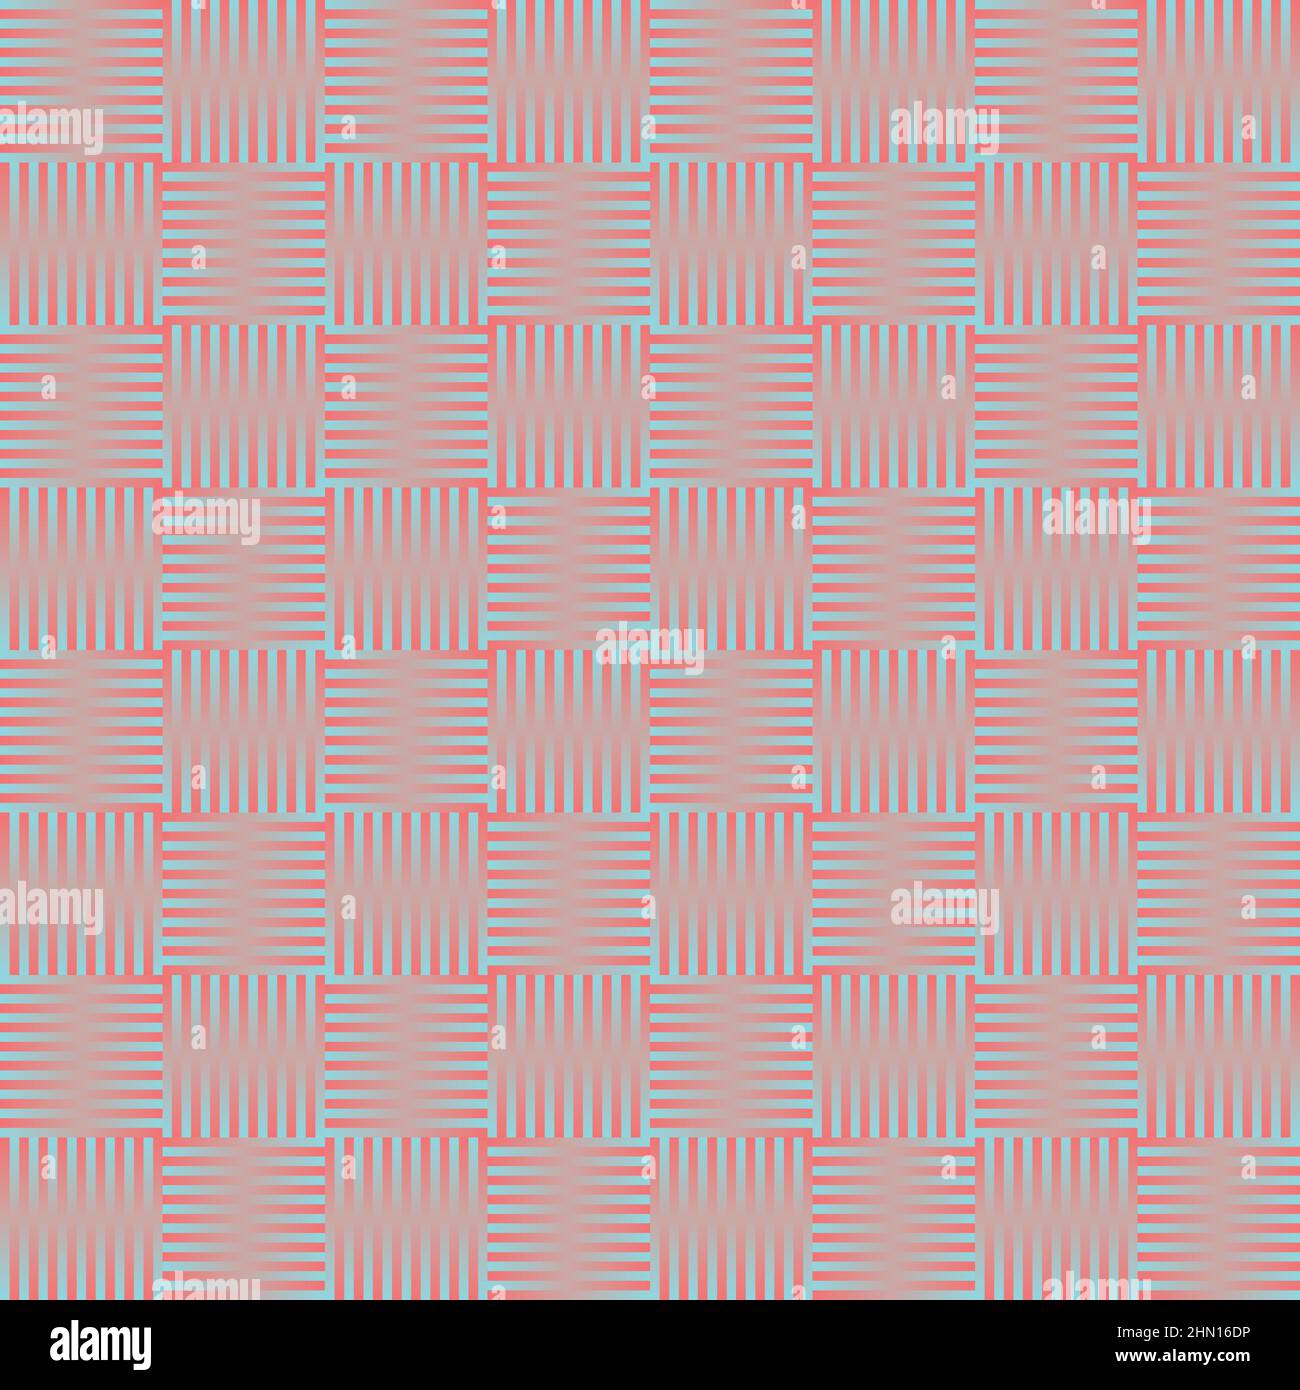 Striped seamless tile pattern in soft red and blue. Horizontal and vertical lines are alternate. The tiles are square. Stock Vector